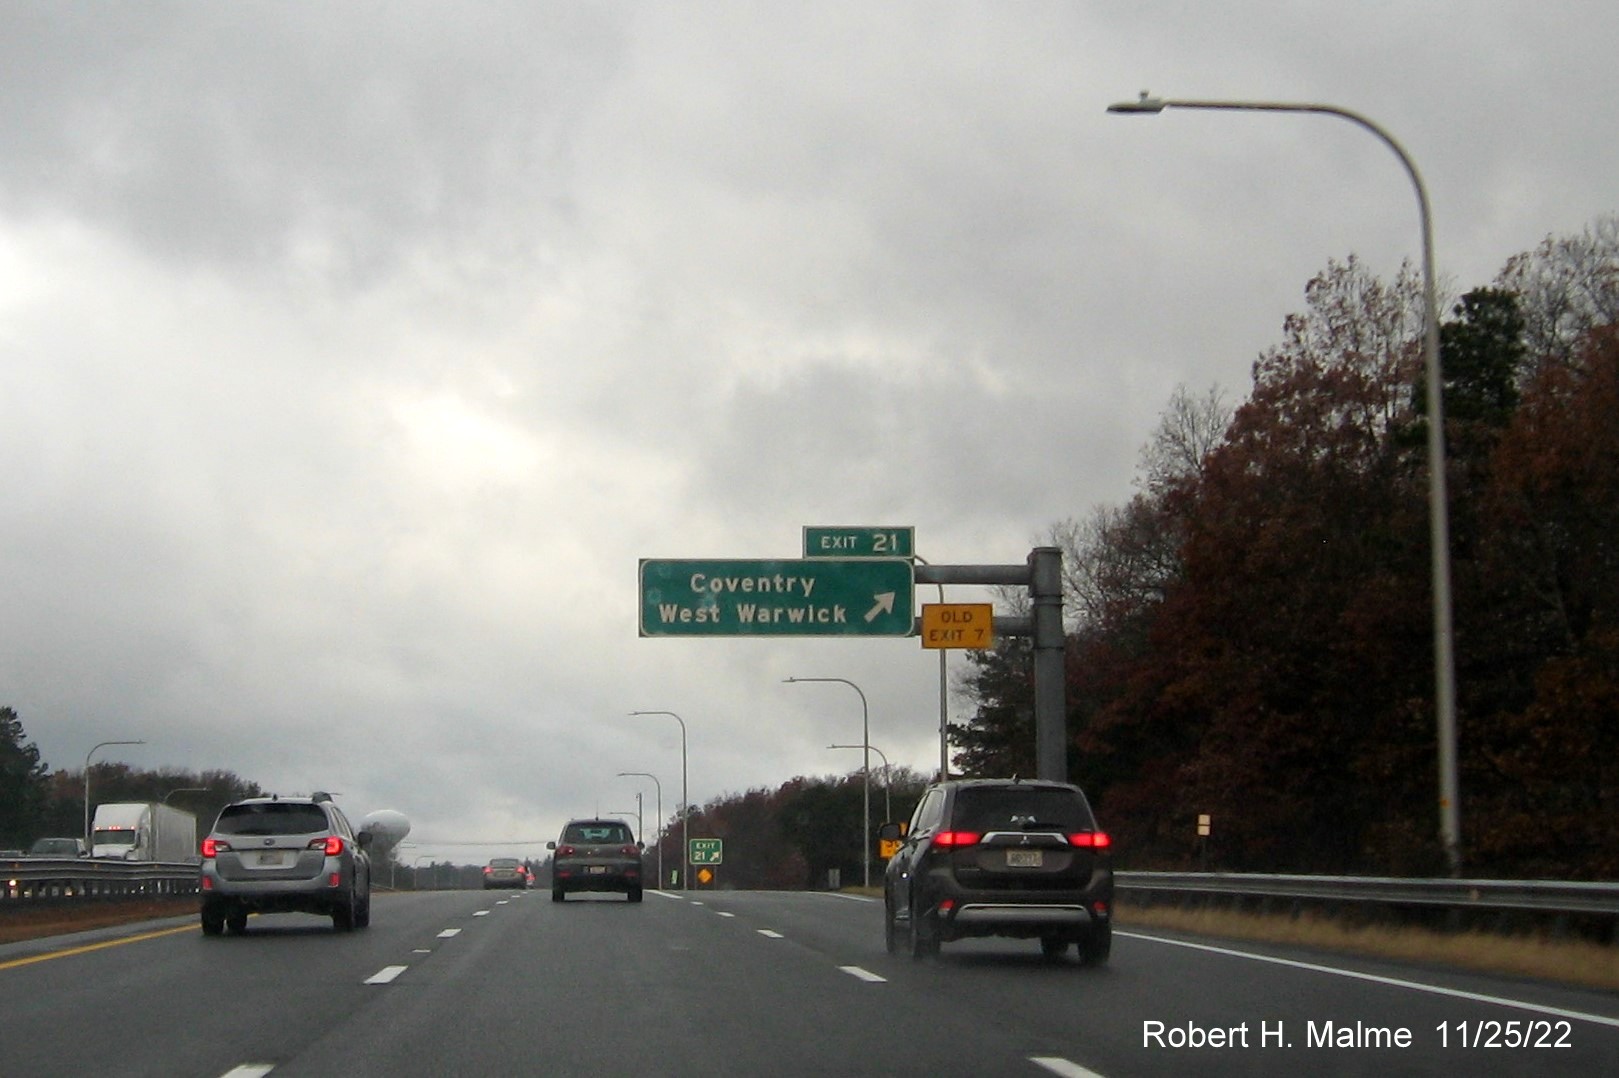 Image of overhead ramp sign for Coventry/West Warwick exit with new milepost exit number and yellow Old Exit 7 sign above exit tab, on I-95 South, November 2022